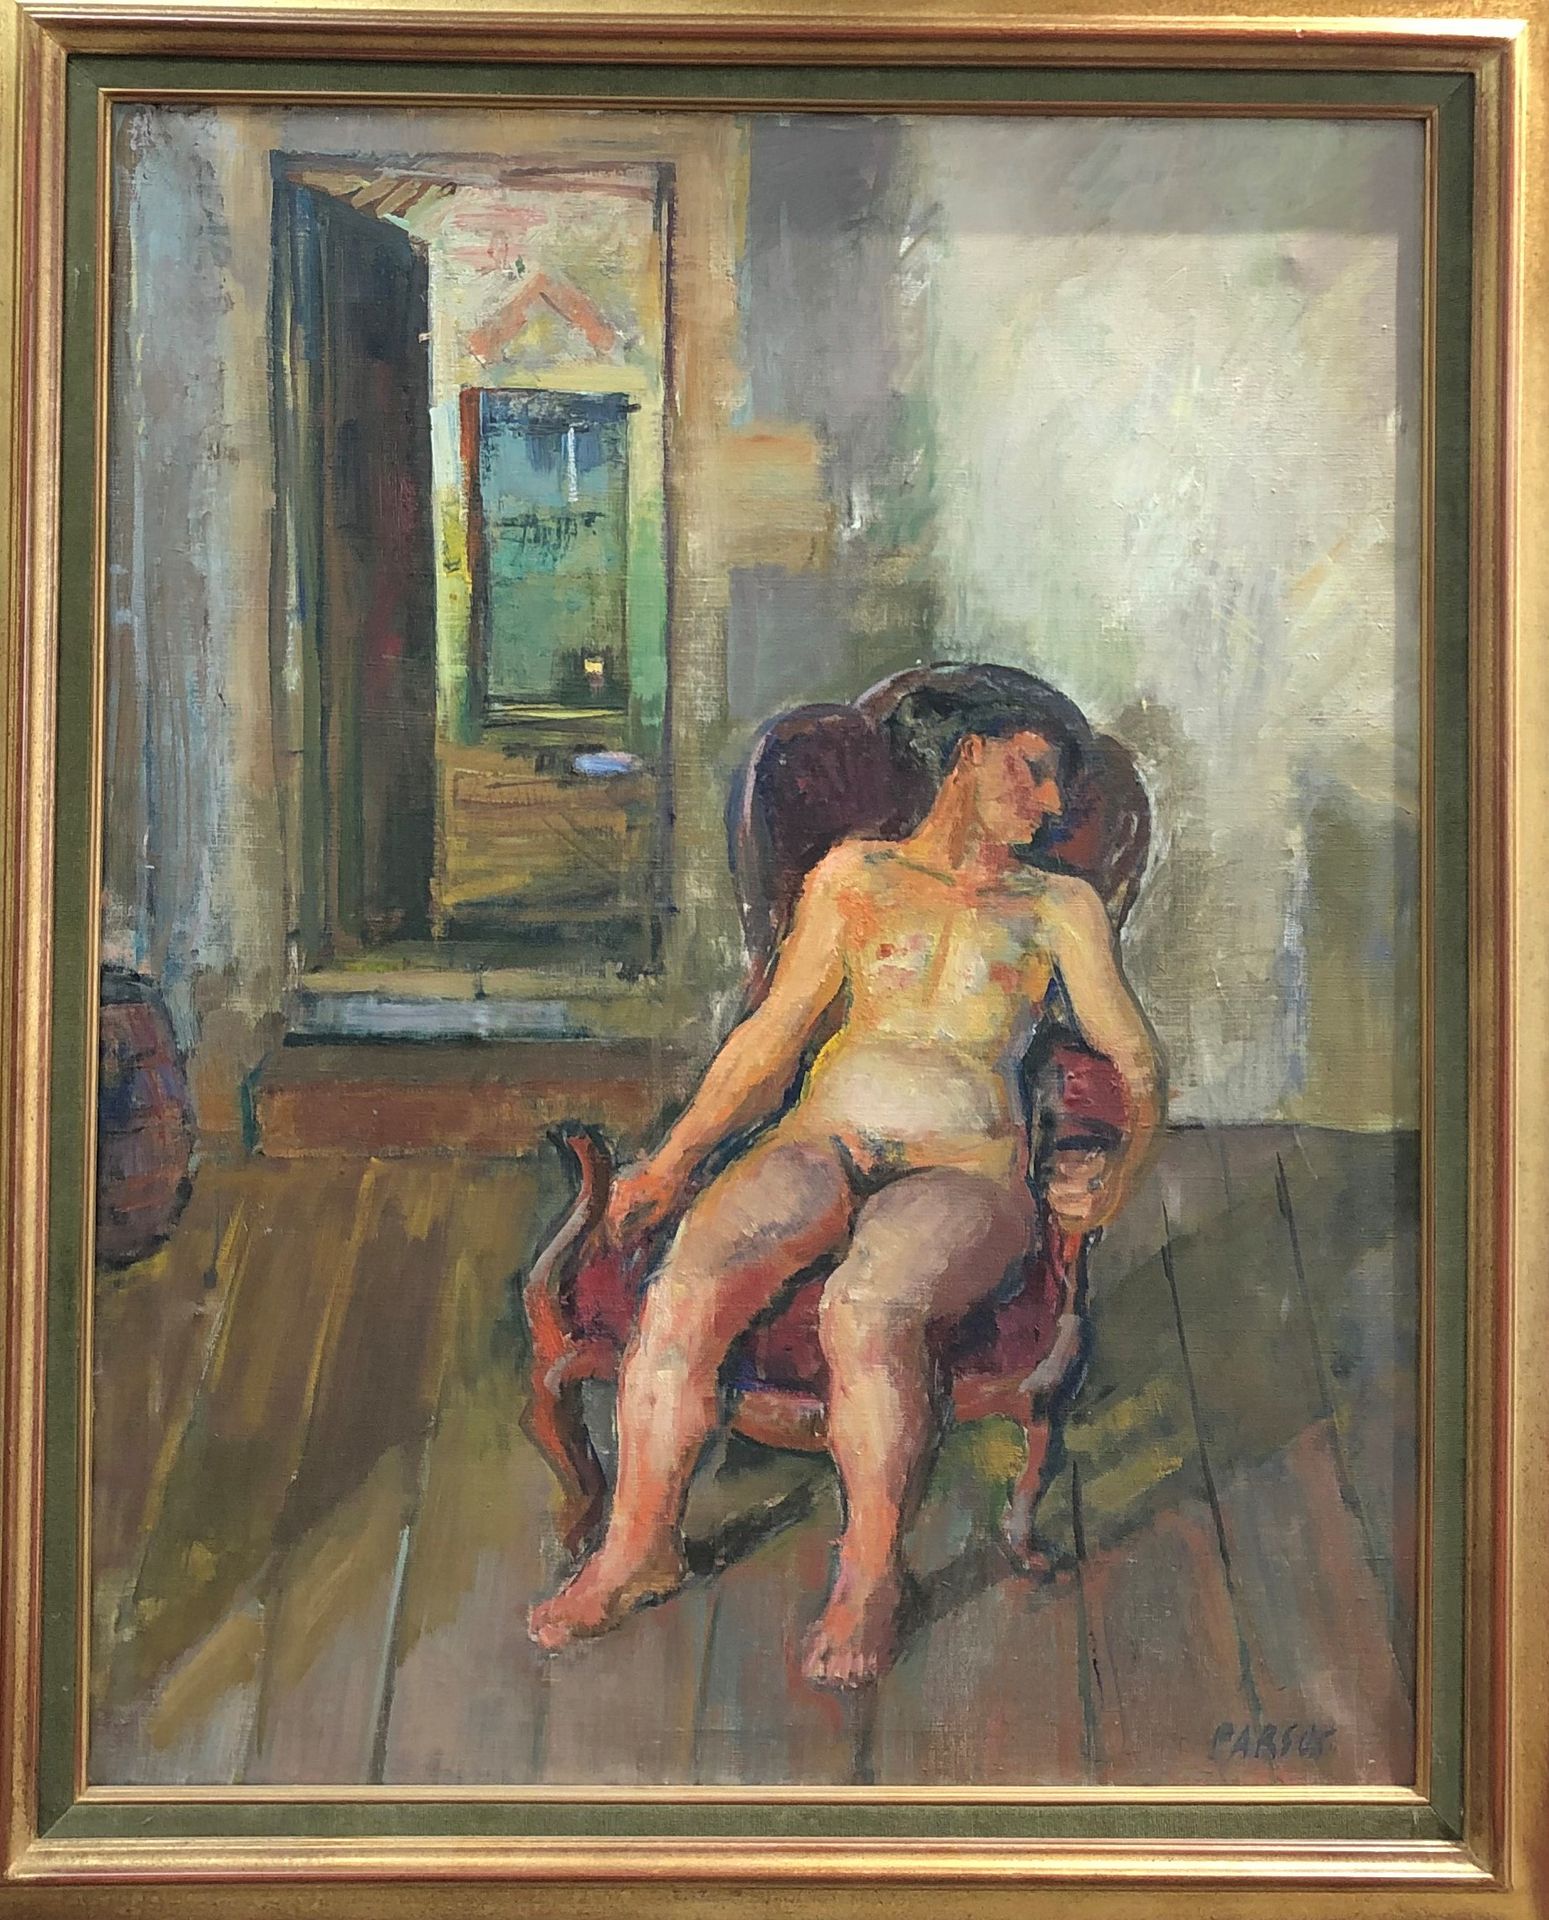 Null Pierre PARSUS (born in 1921)

Nude sitting in an armchair 

Oil on canvas. &hellip;